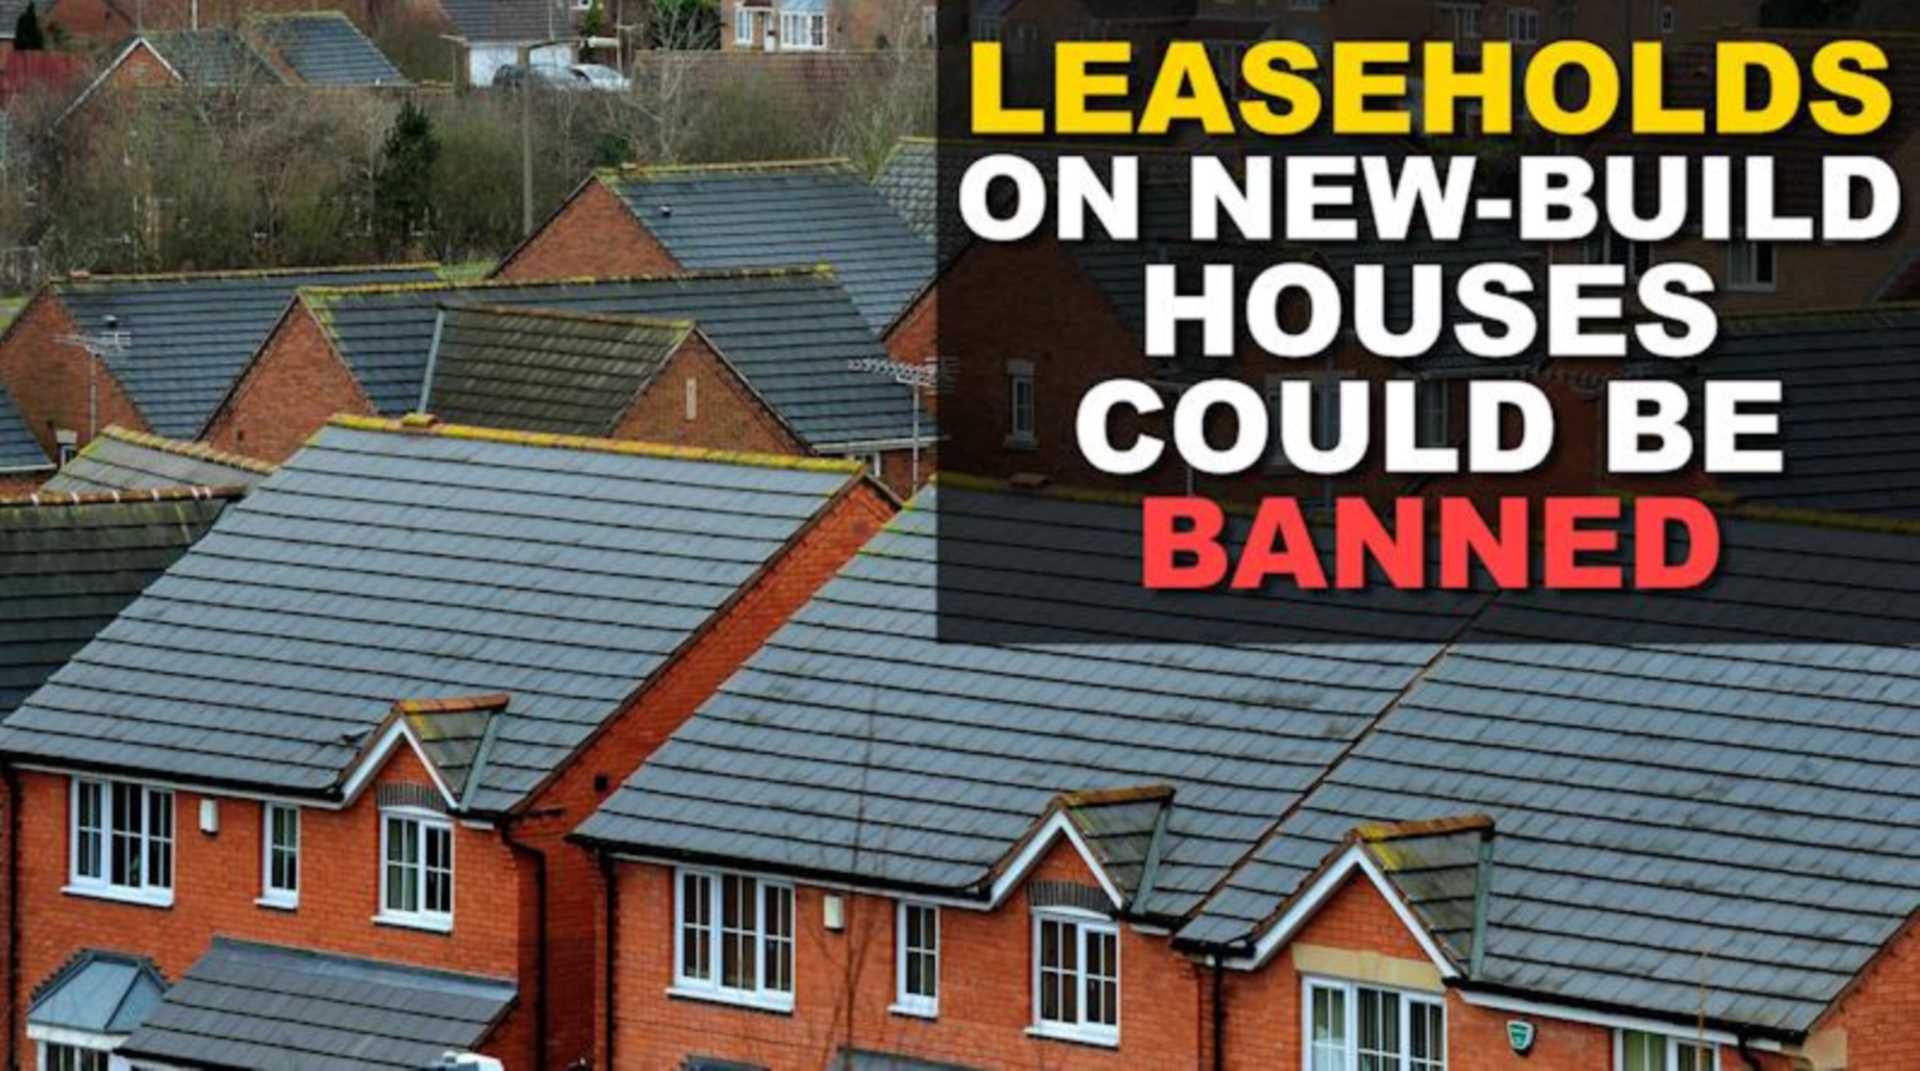 Leasehold house and developers scam